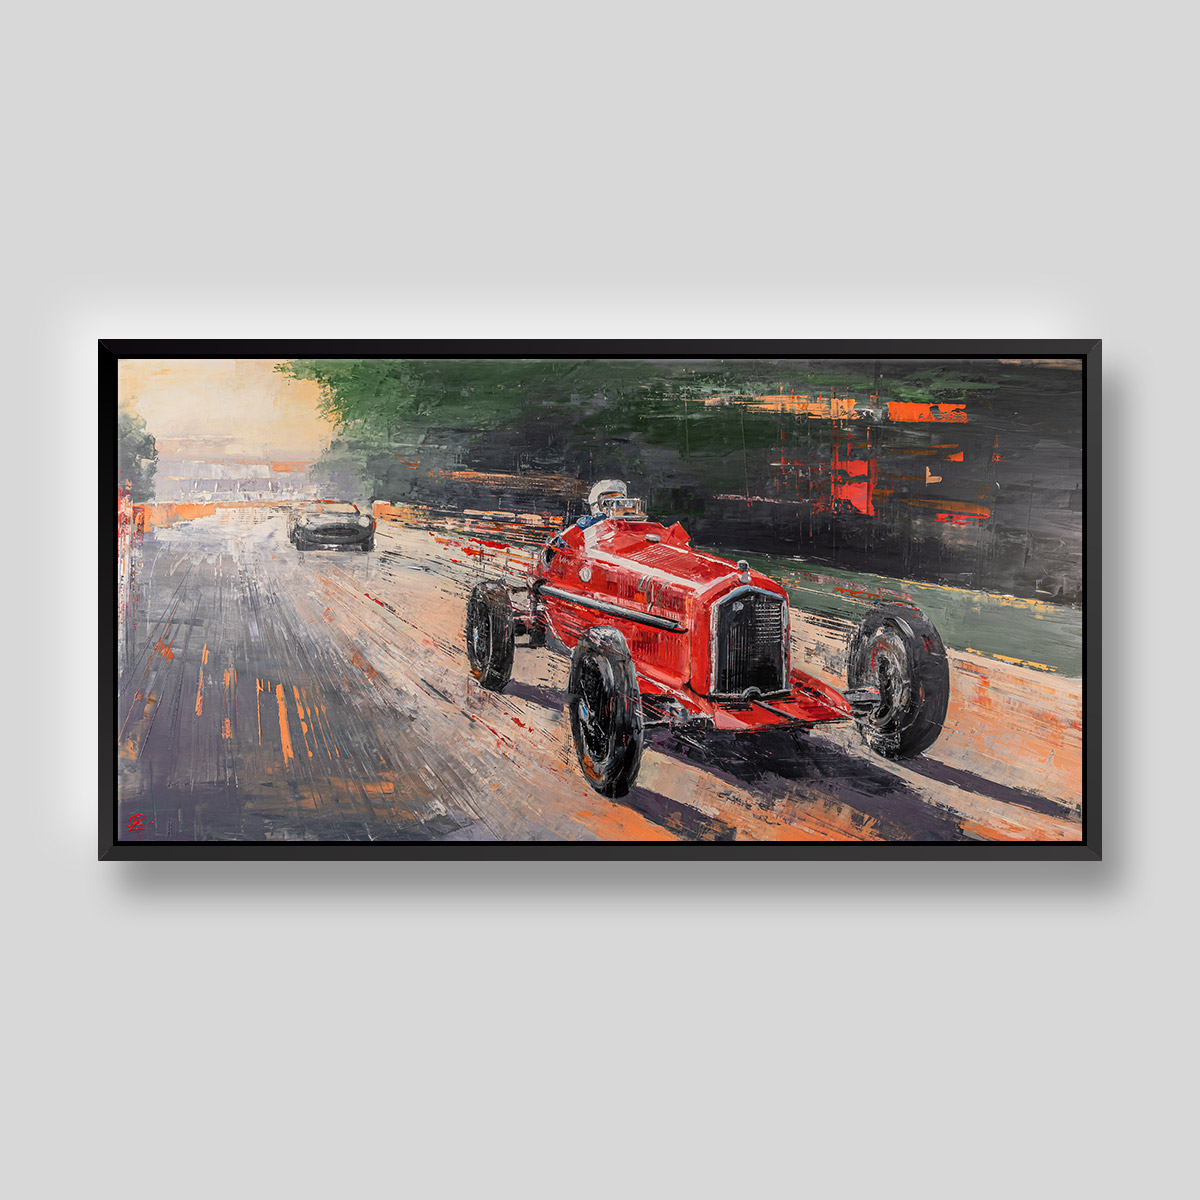 Racing Revival by Paul Kenton, UK Contemporary artist, a painting from his Motorsports collection